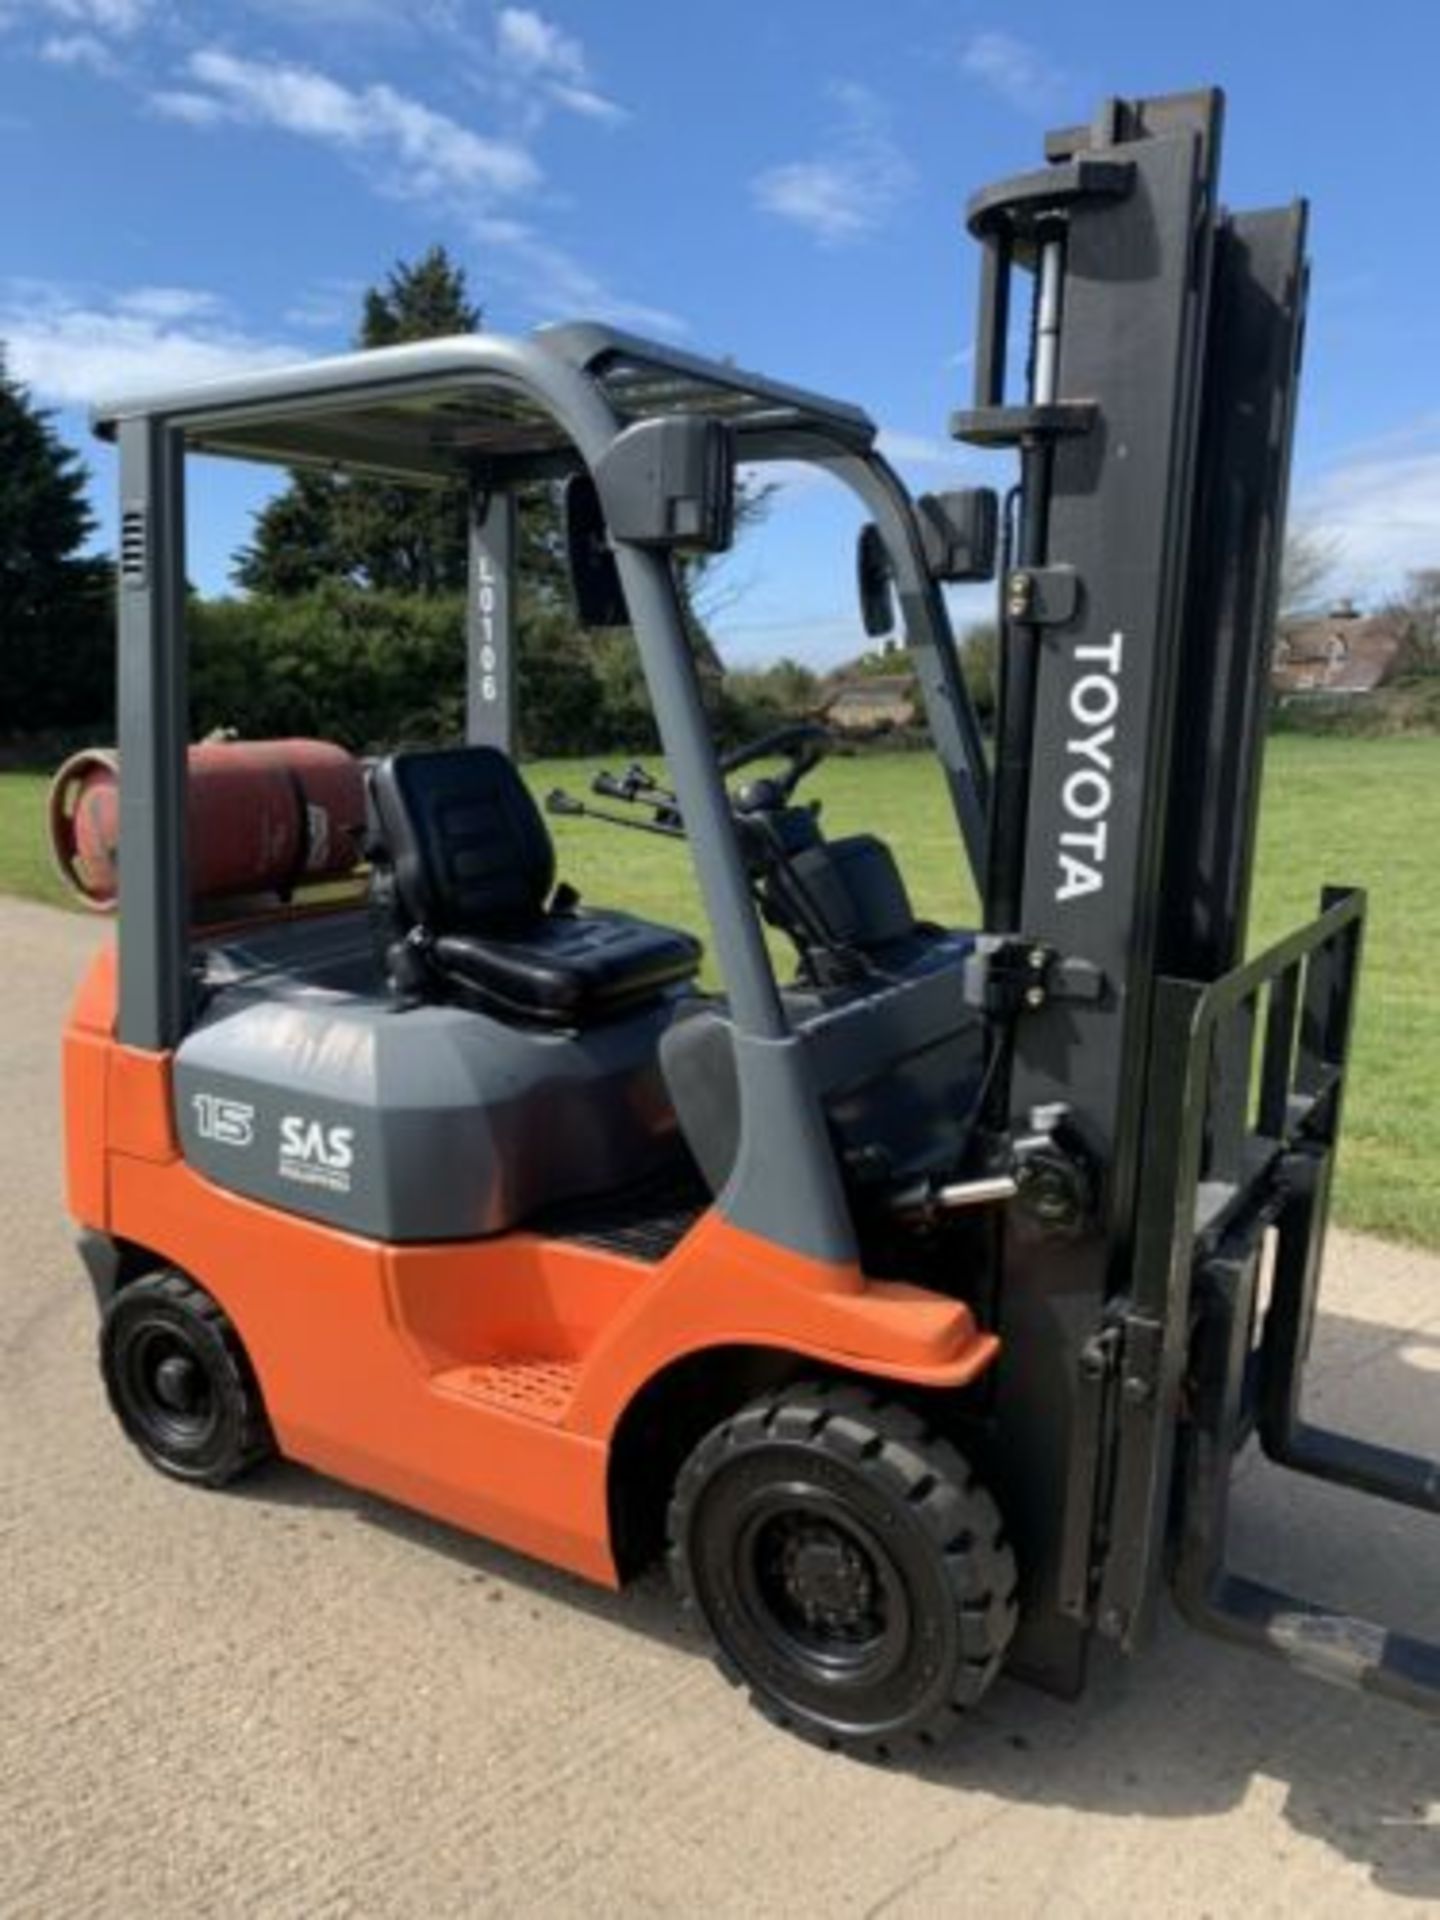 Toyota 1.5 Tonne Gas Forklift Truck - Image 3 of 6